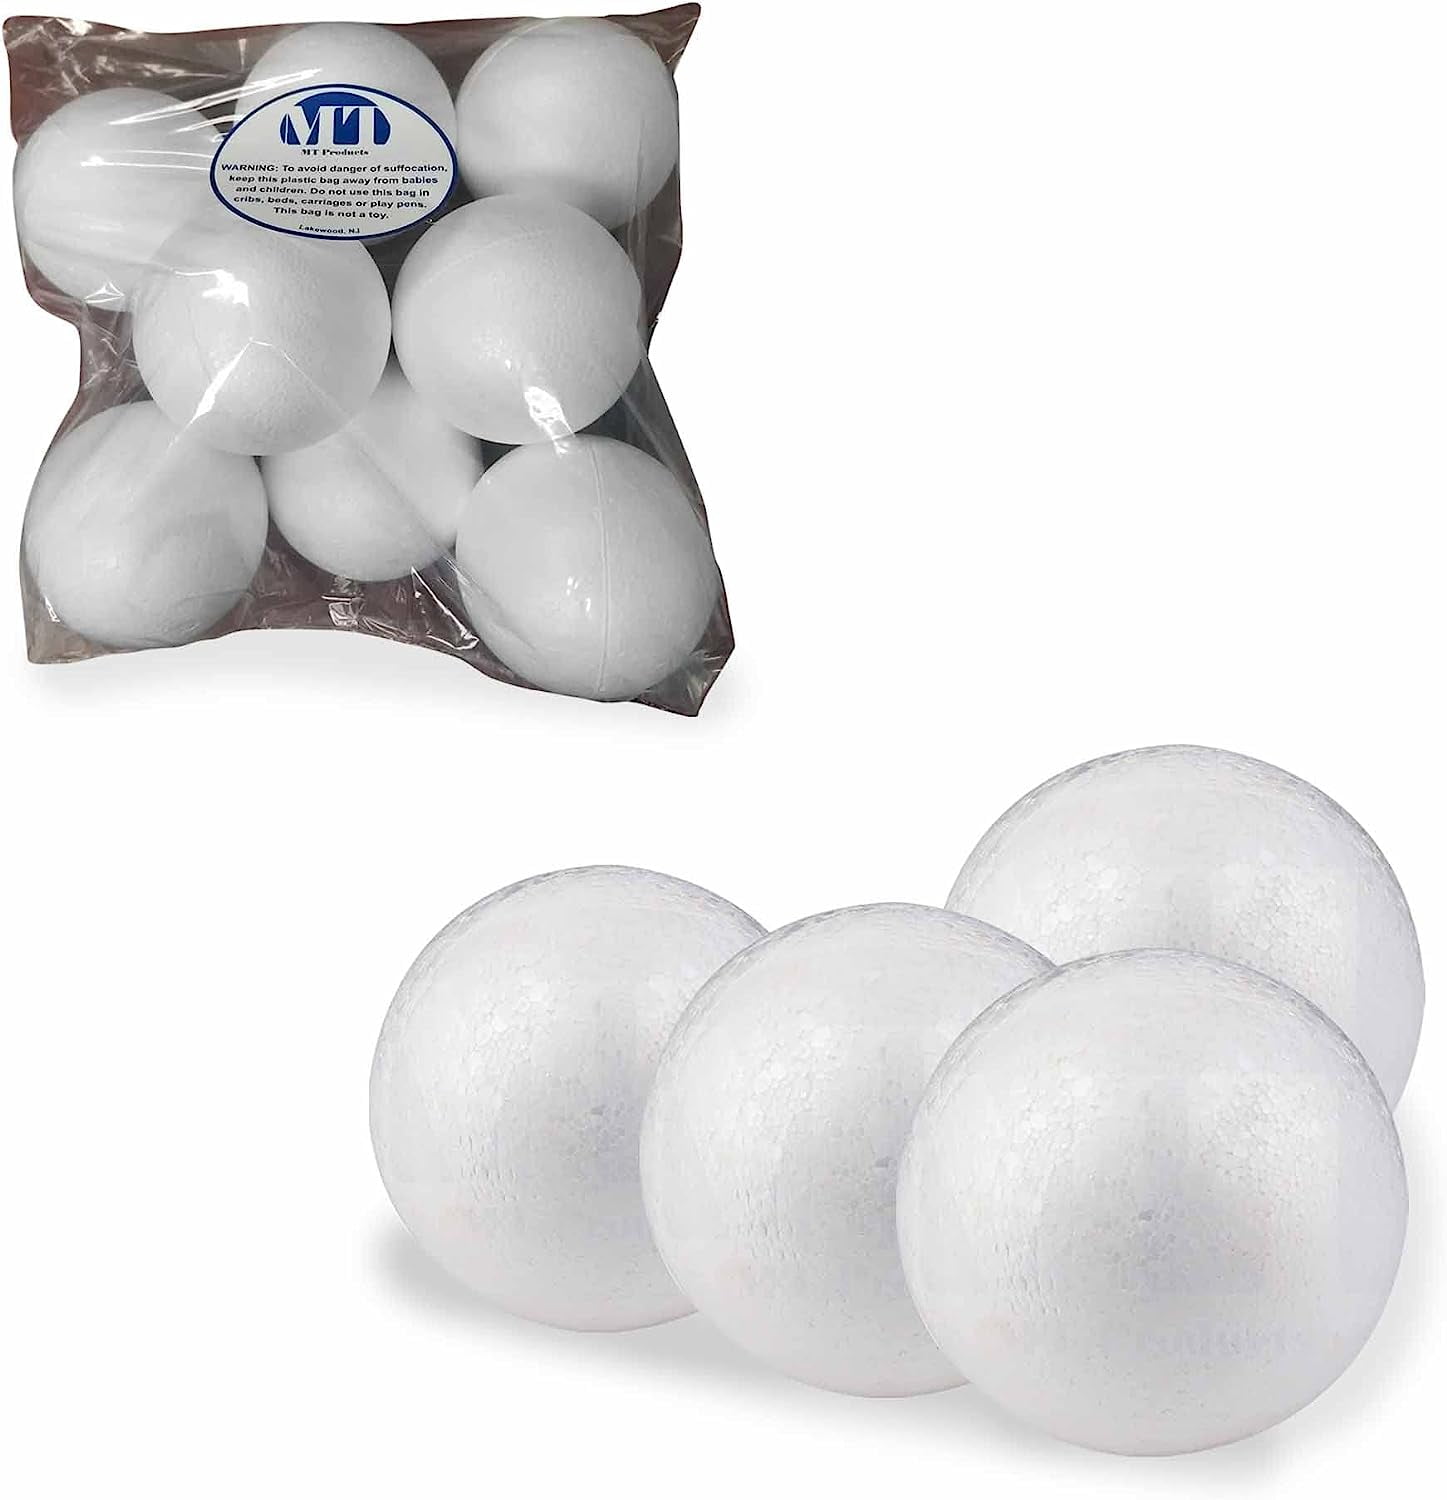 75-Pack Bulk Foam Balls for Crafts for DIY Arts and Supplies, 2